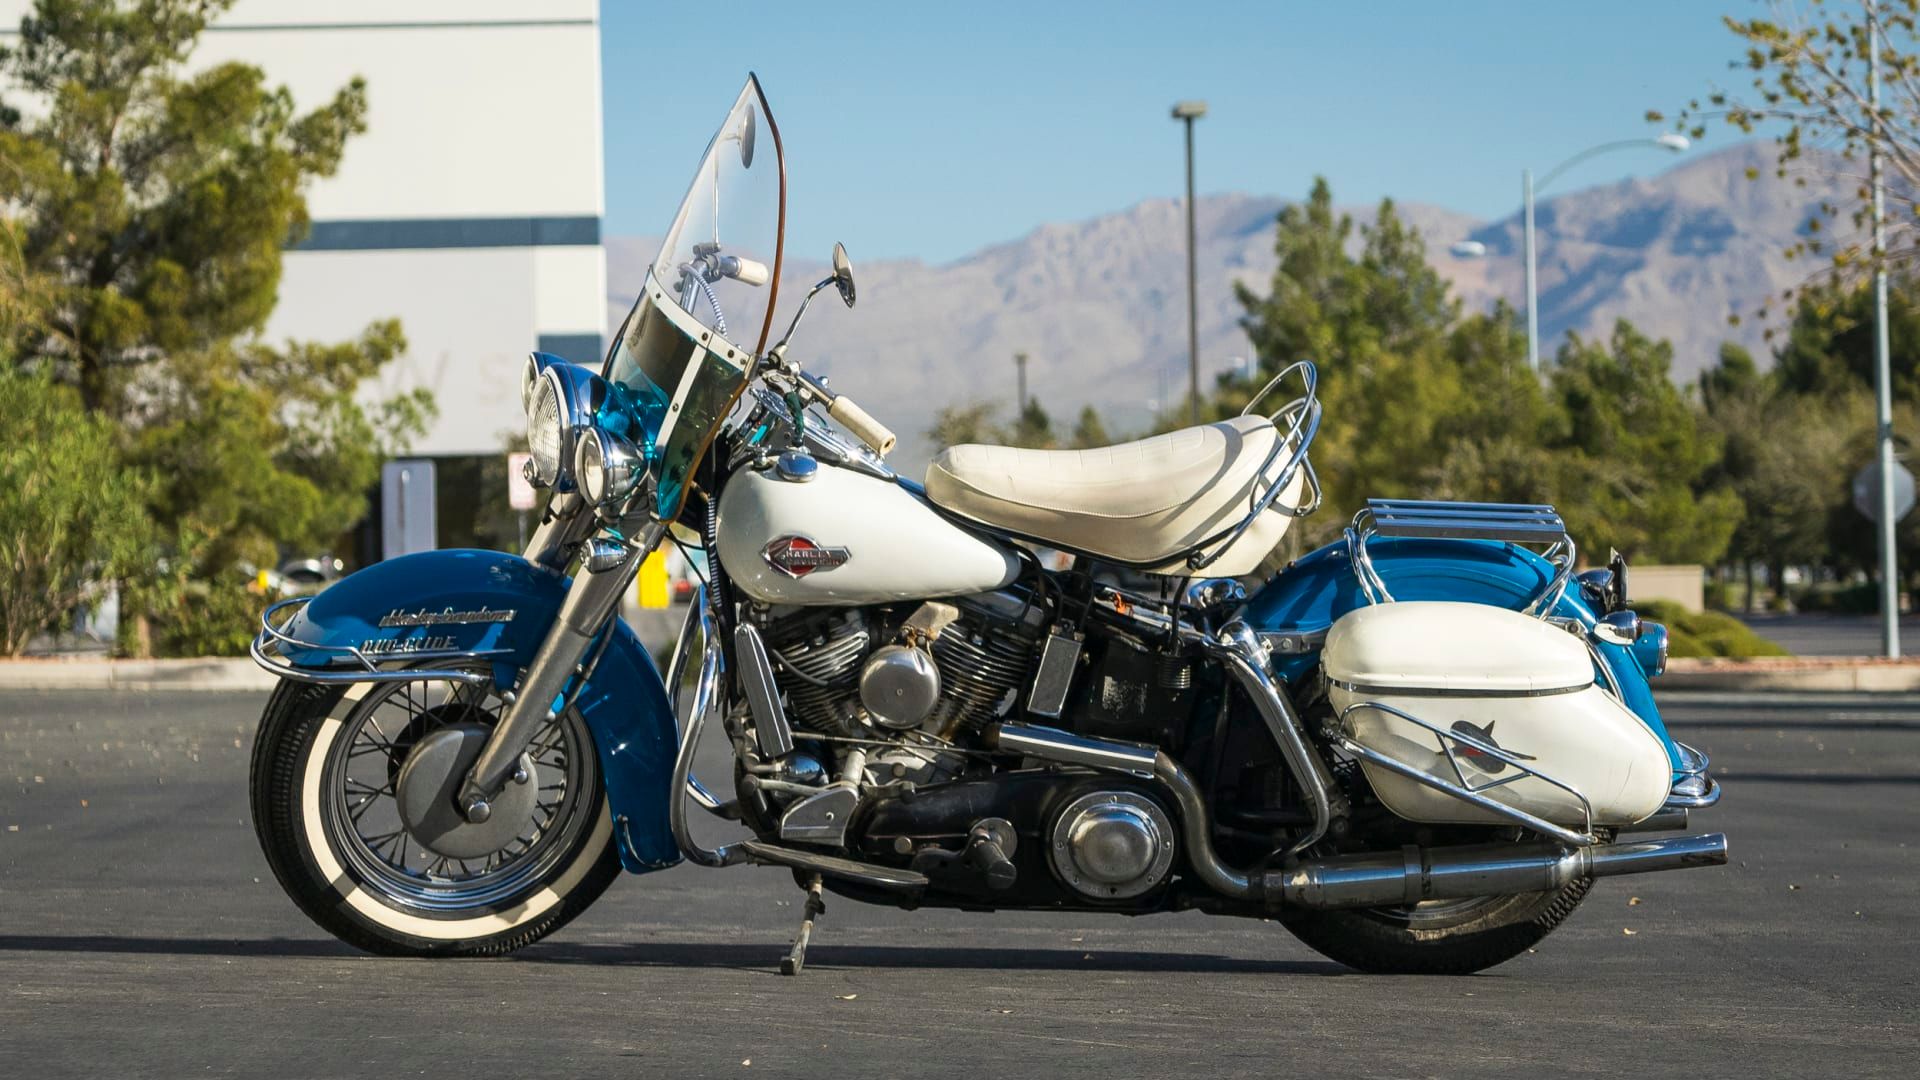 1959 Harley-Davidson FLH Duo-Glide in a striking shade of blue and white side profile view